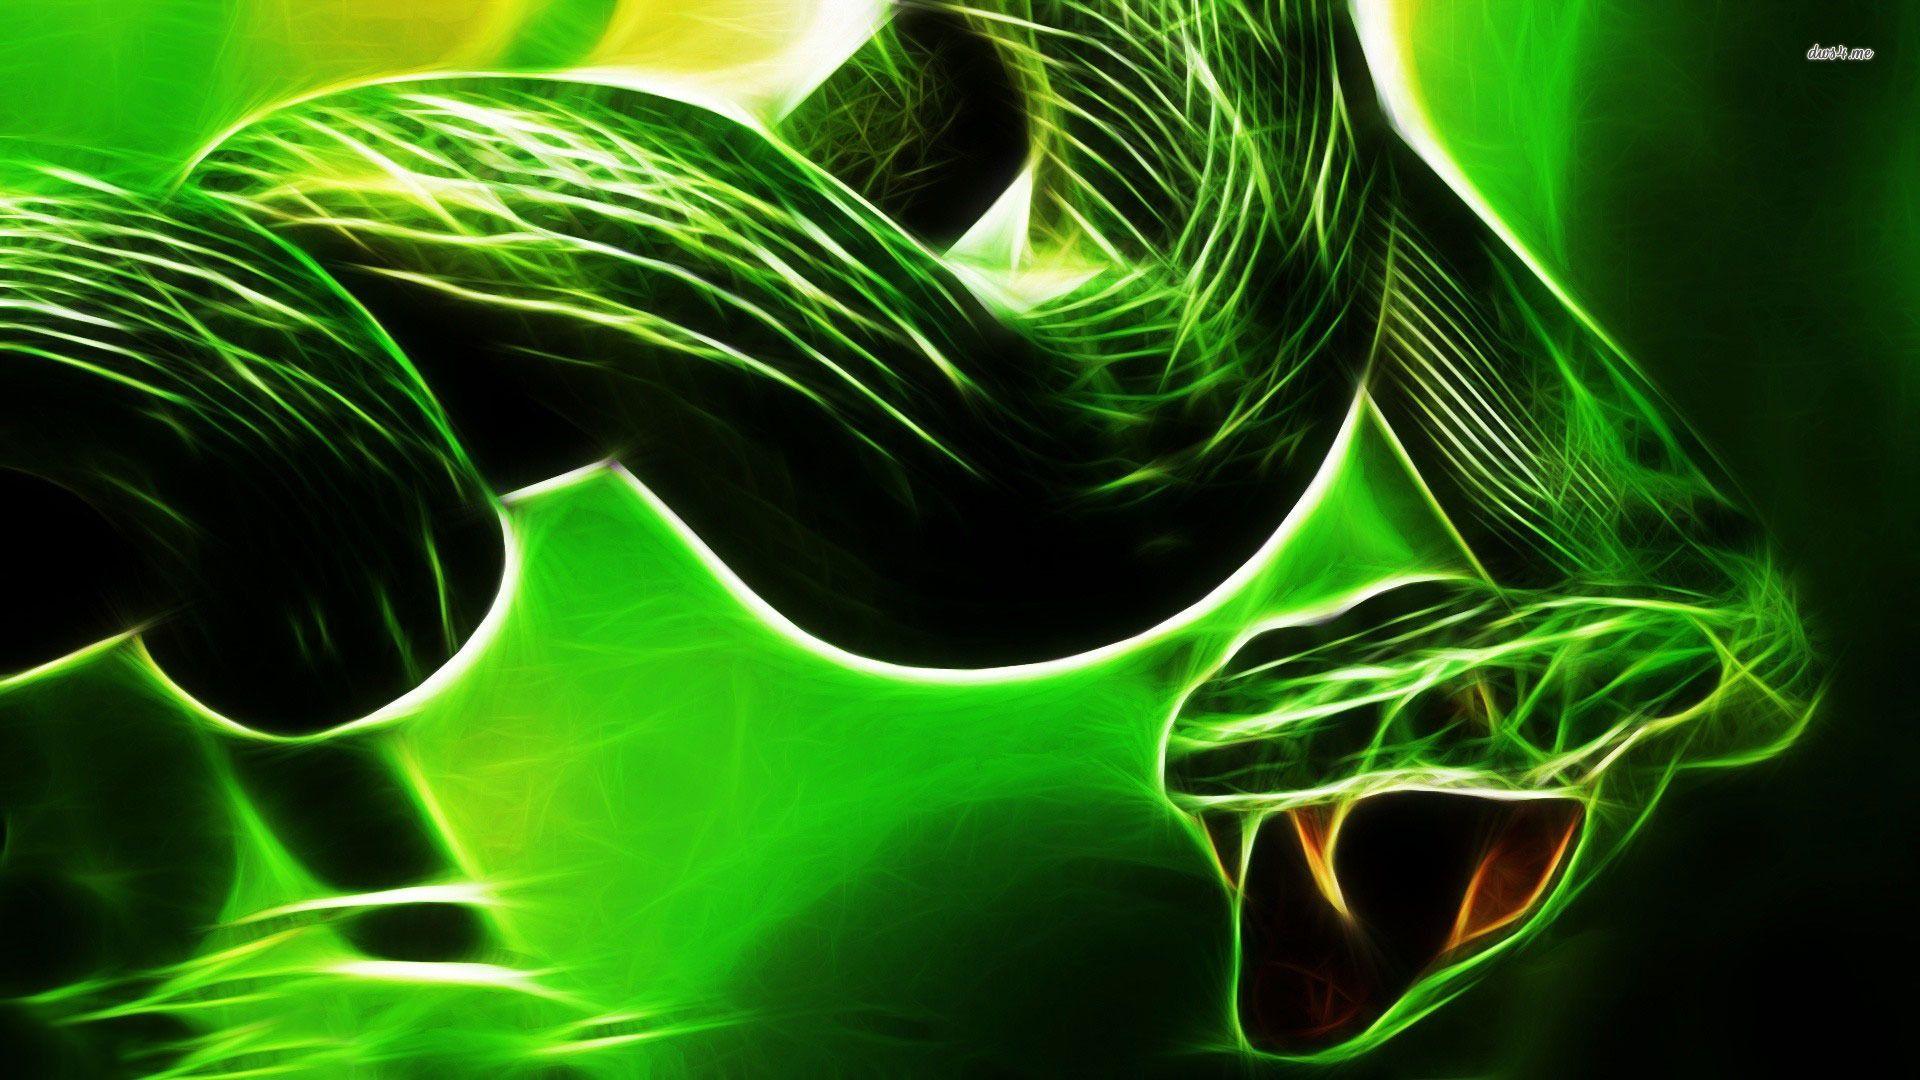 Neon Animals Wallpapers Wallpaper Cave Silky texture provides speed and control. neon animals wallpapers wallpaper cave